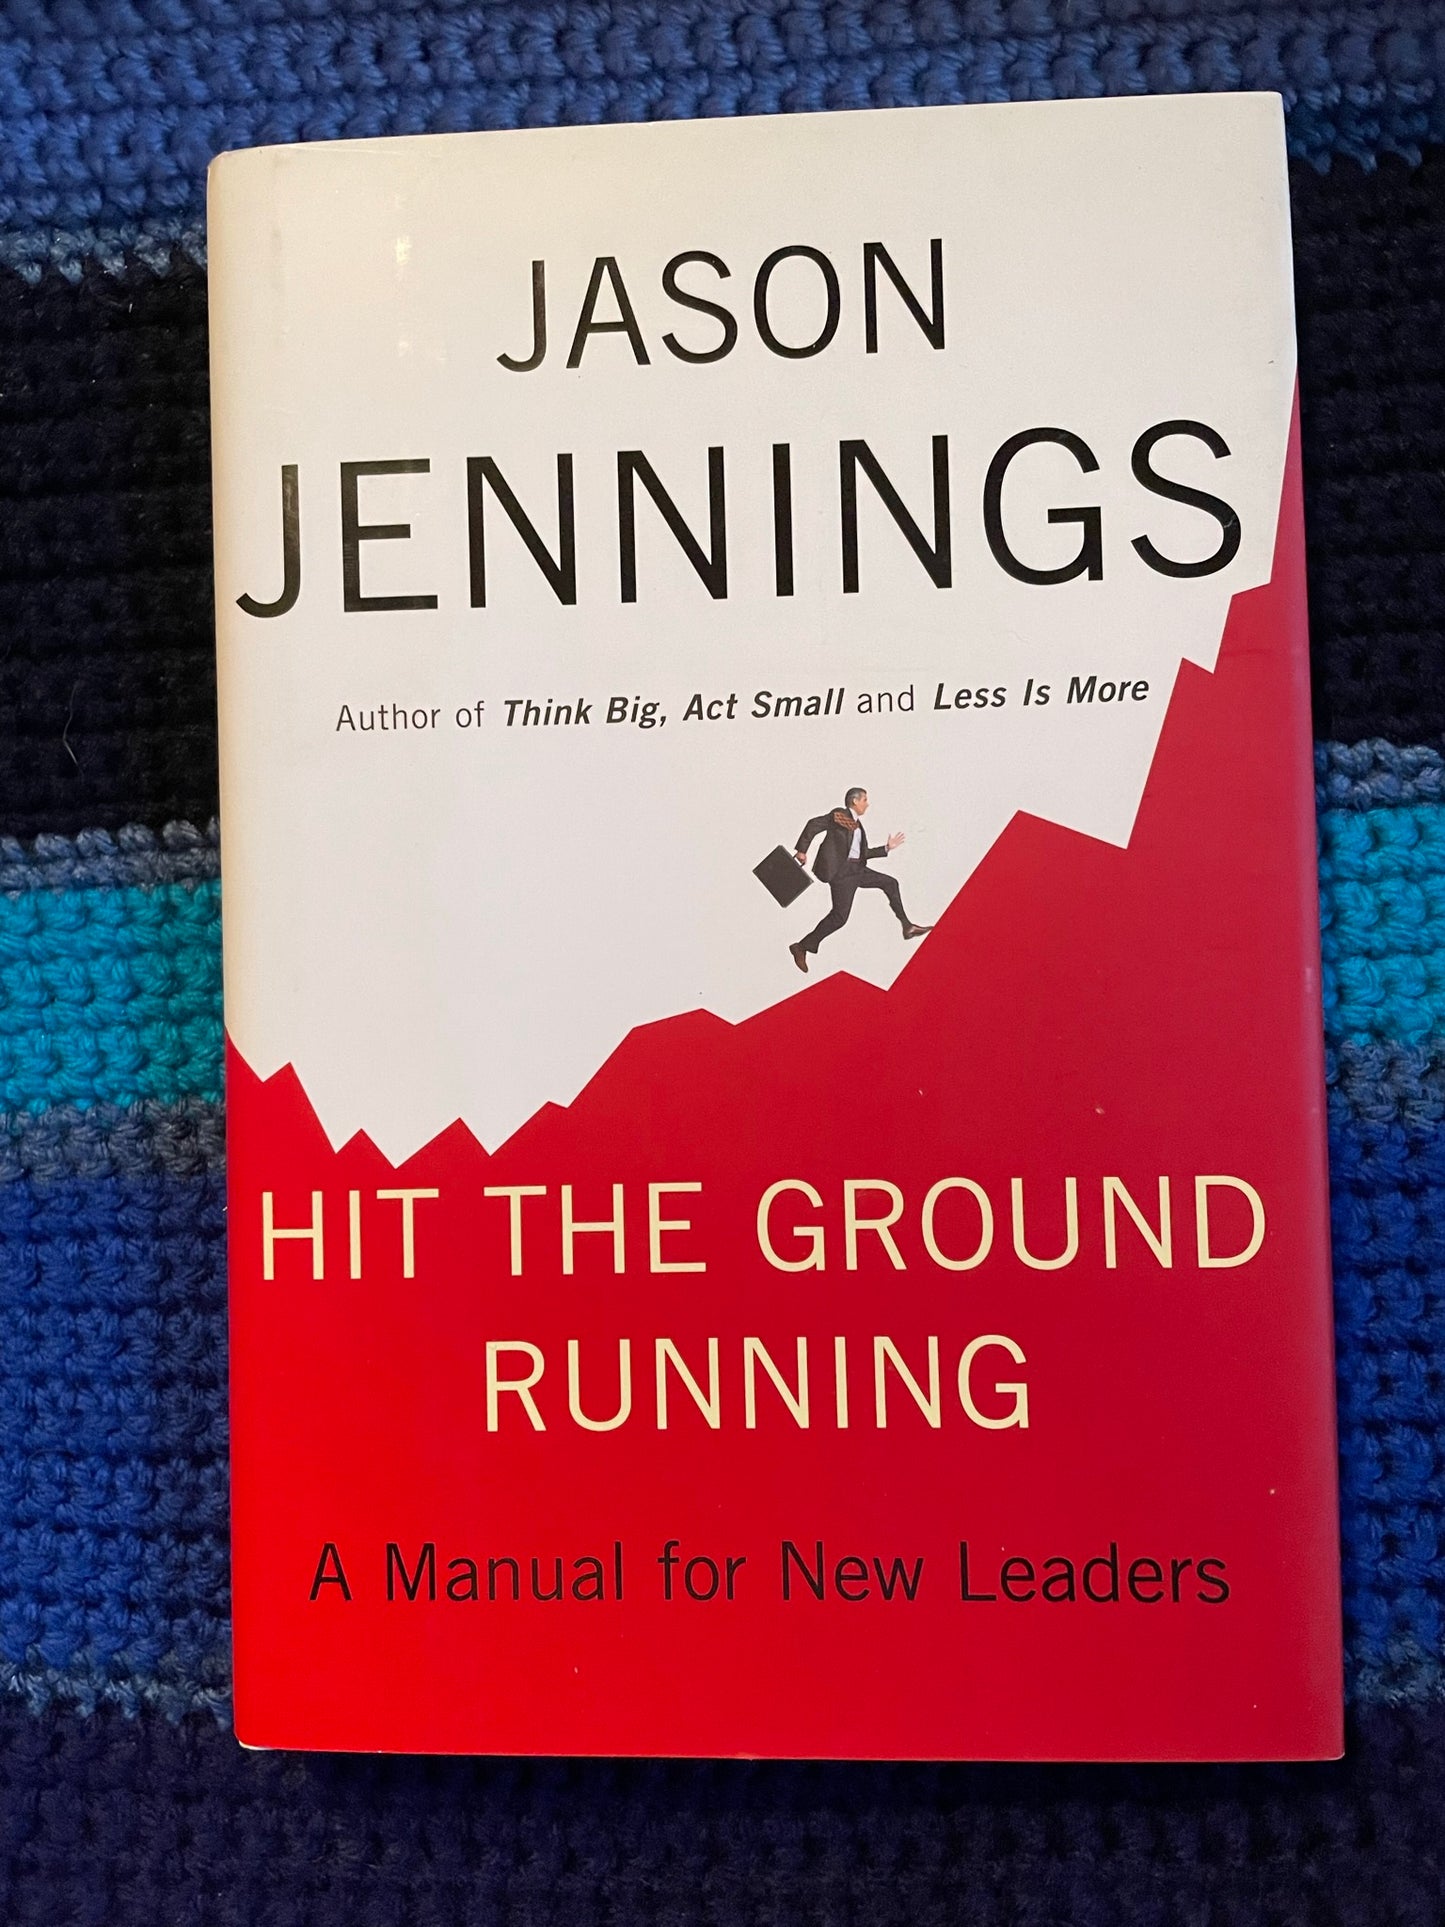 Jennings, Jason: Hit The Ground Running - A Manual for New Leaders (First Edition, 2009, SIGNED)